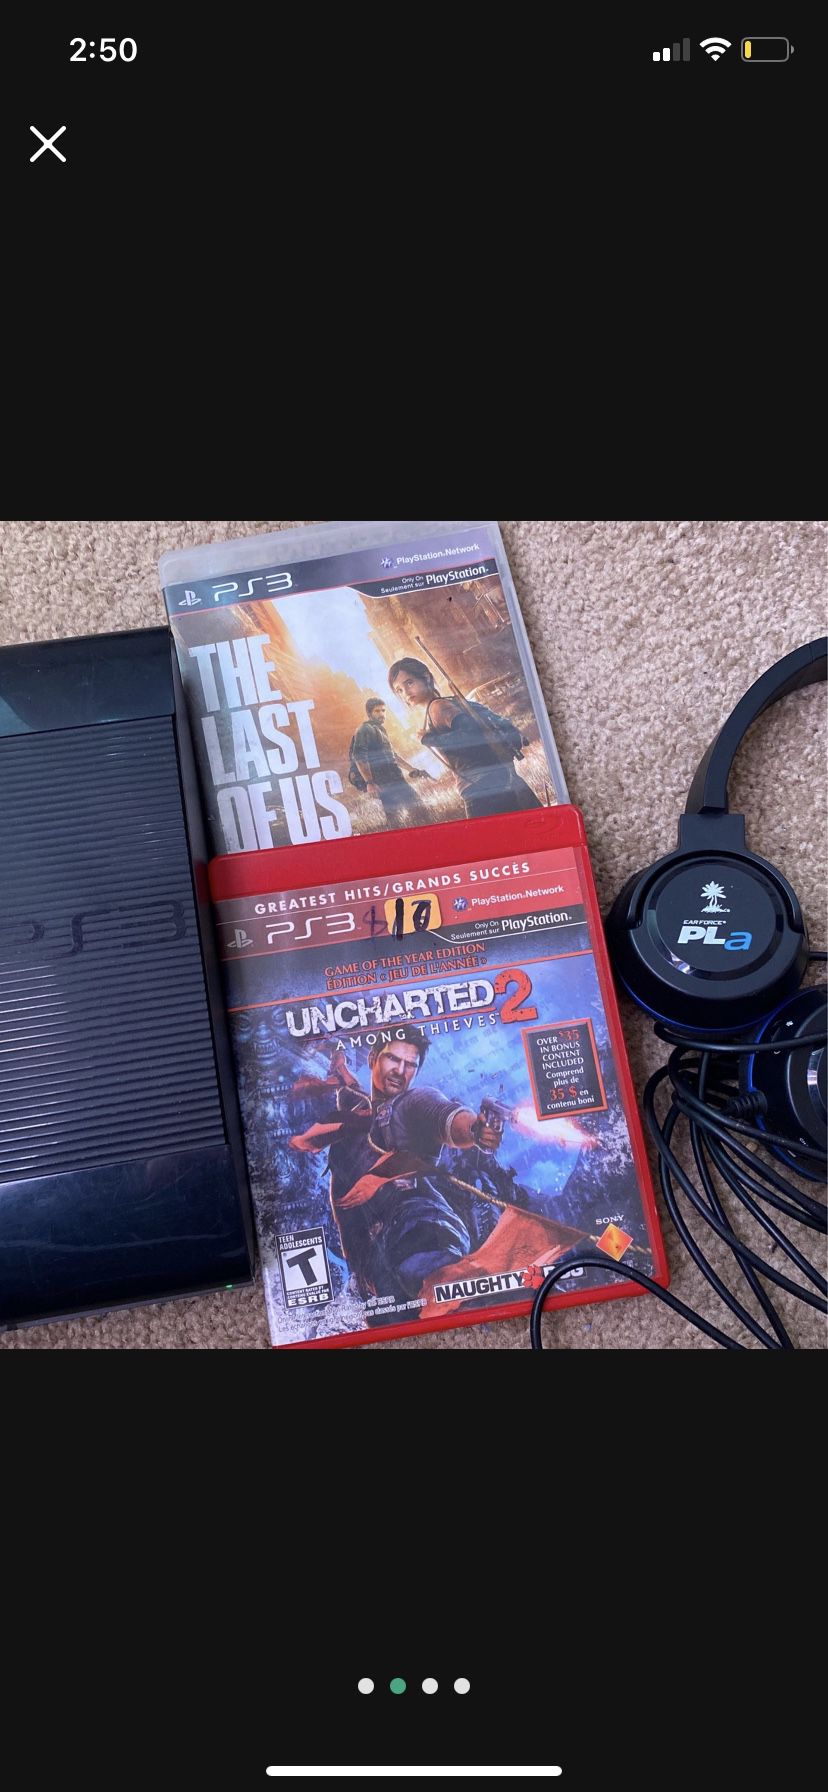 PS3, Headset, And Two Games  